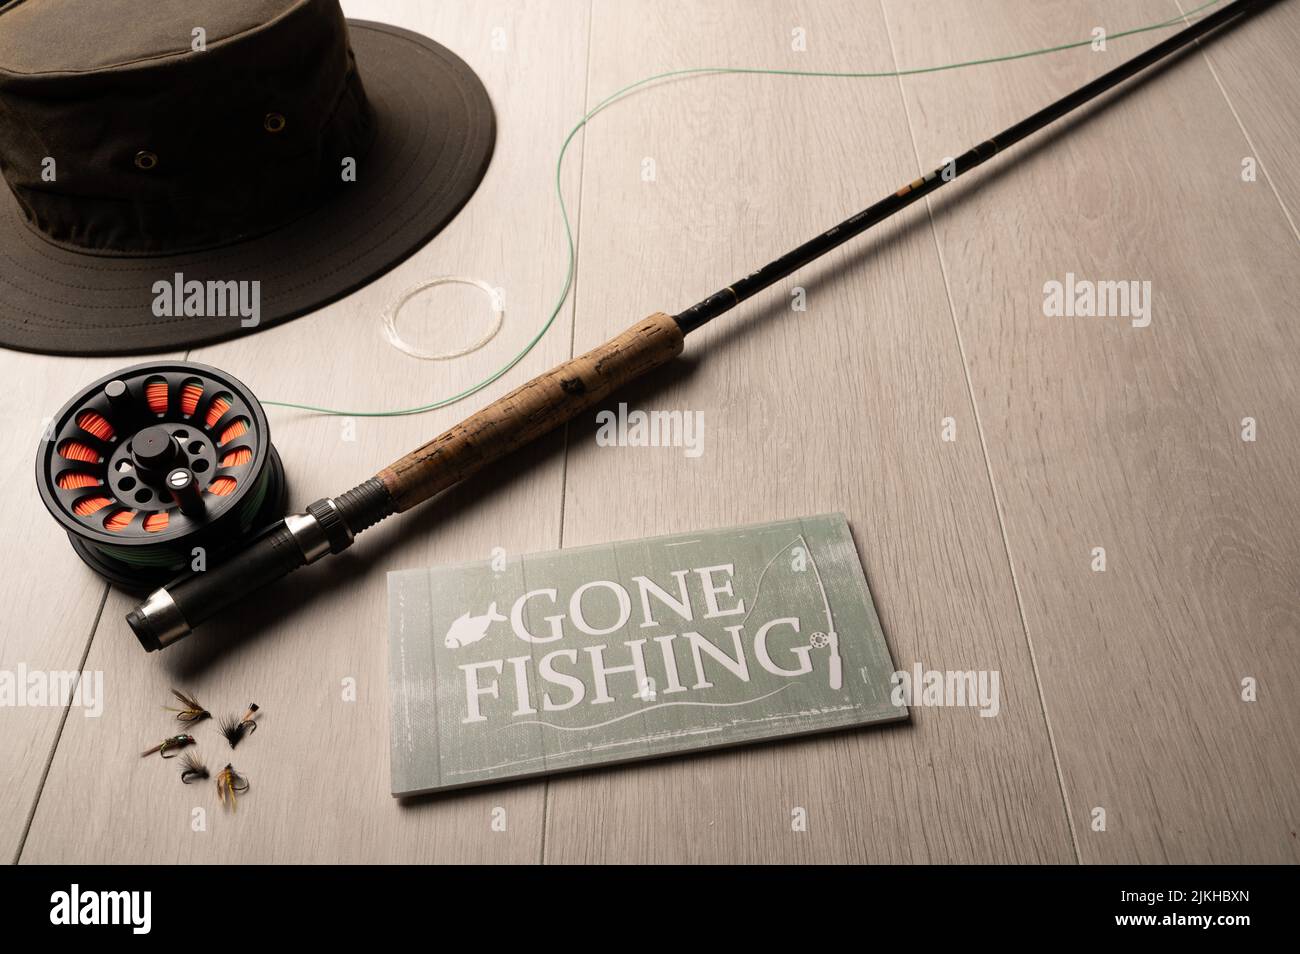 Gone fishing sign, fly fishing tackle, on a light wood background with copy space Stock Photo